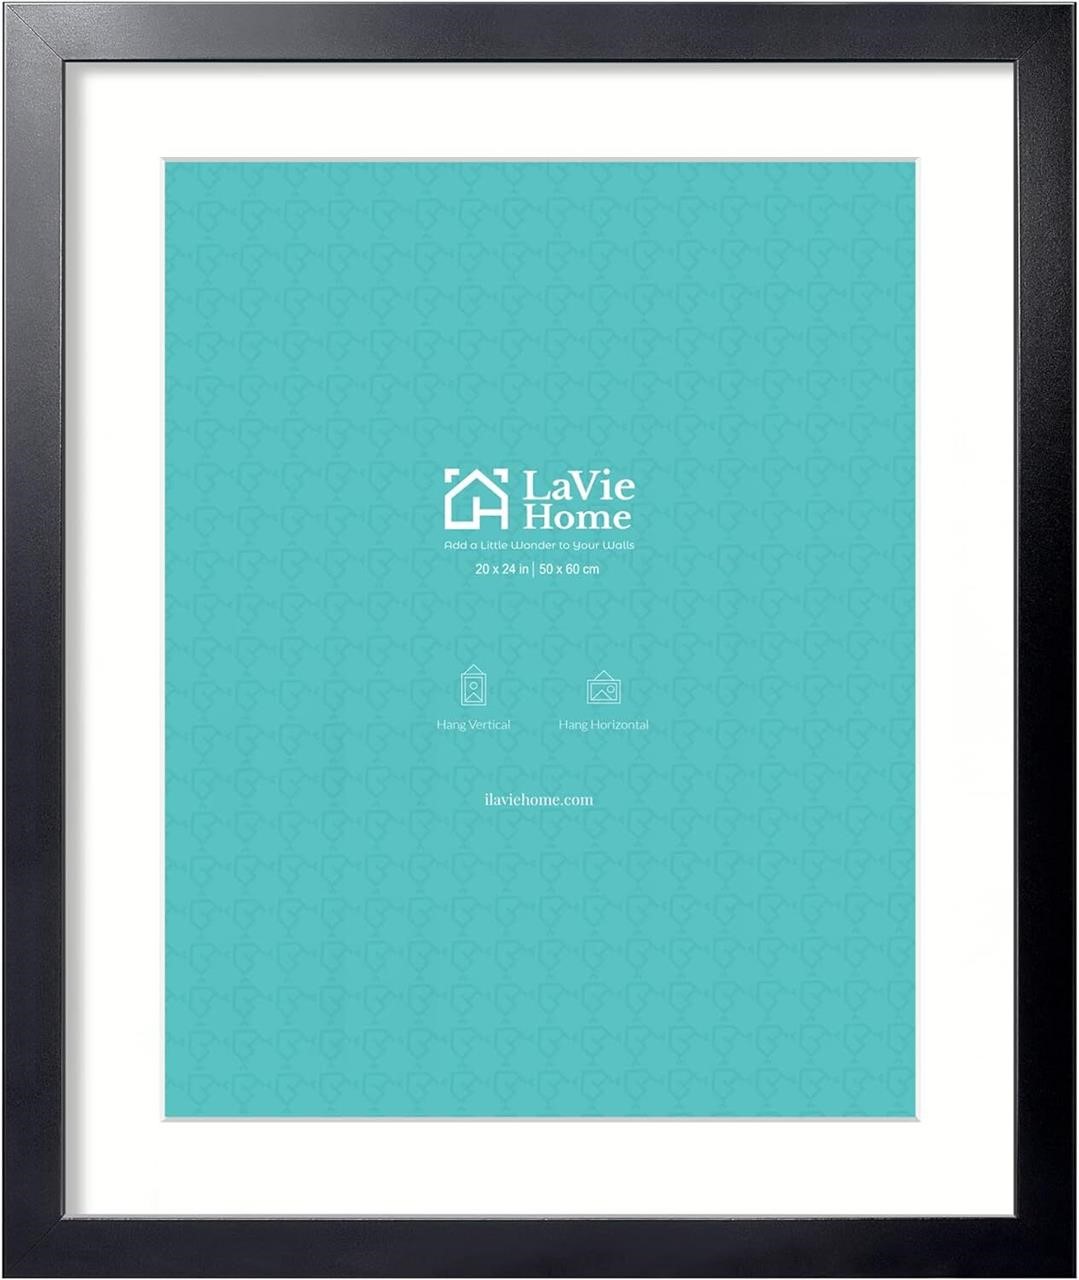 LaVie Home 20x24 Black Frame  Pictures 16x20/20x24